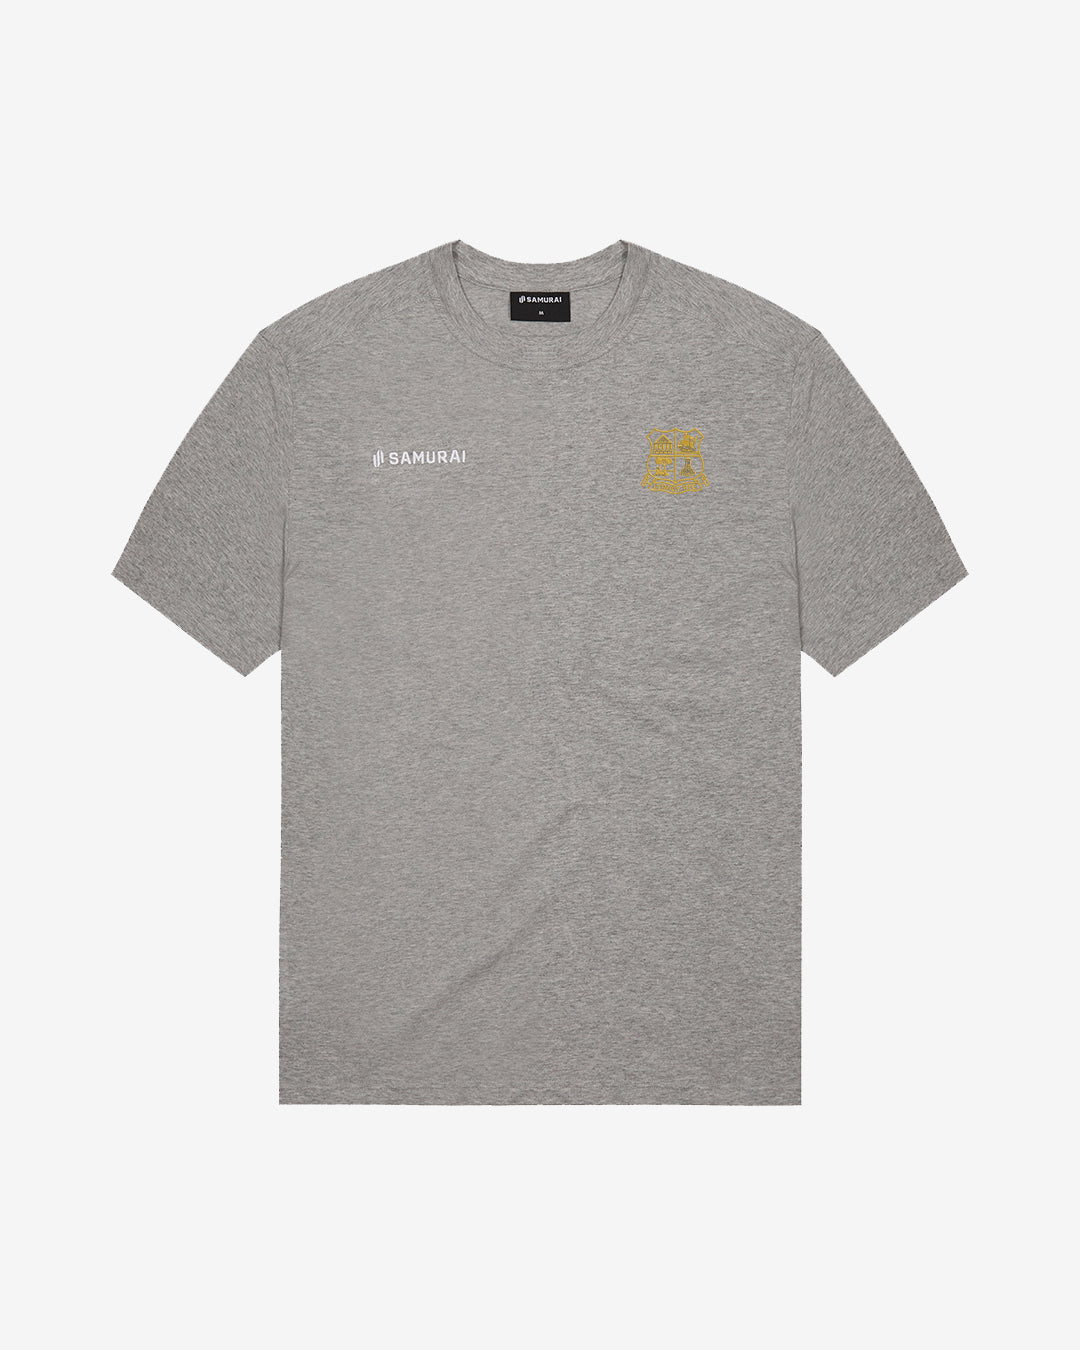 Lydney RFC - EP:0110 - Cotton Touch Tee - Grey